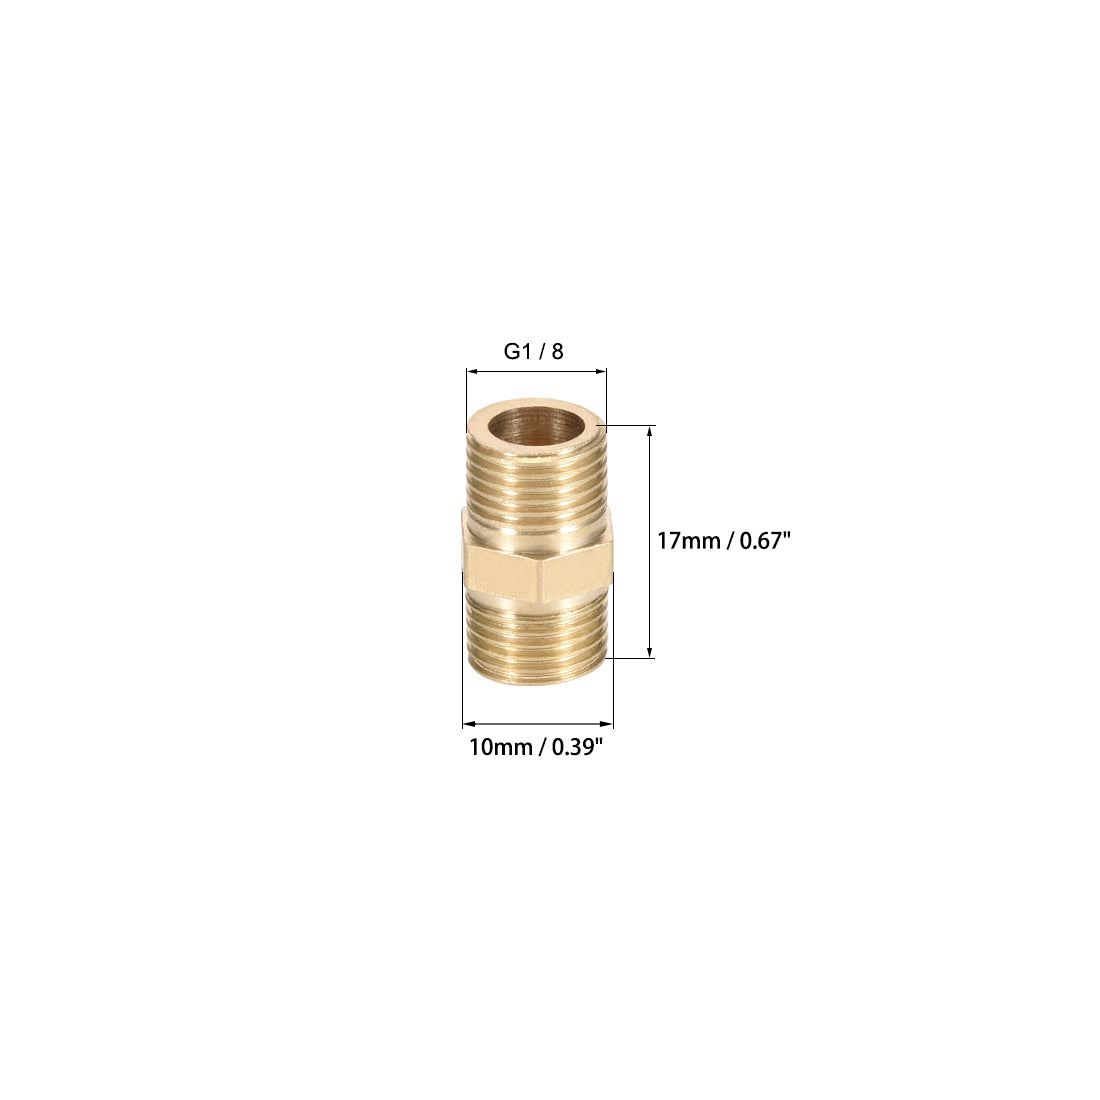 uxcell Uxcell Brass Pipe Fitting Connector Straight Hex Nipple Coupler 1/8 x 1/8 G Male Thread Hose Fittings Gold Tone 6pcs